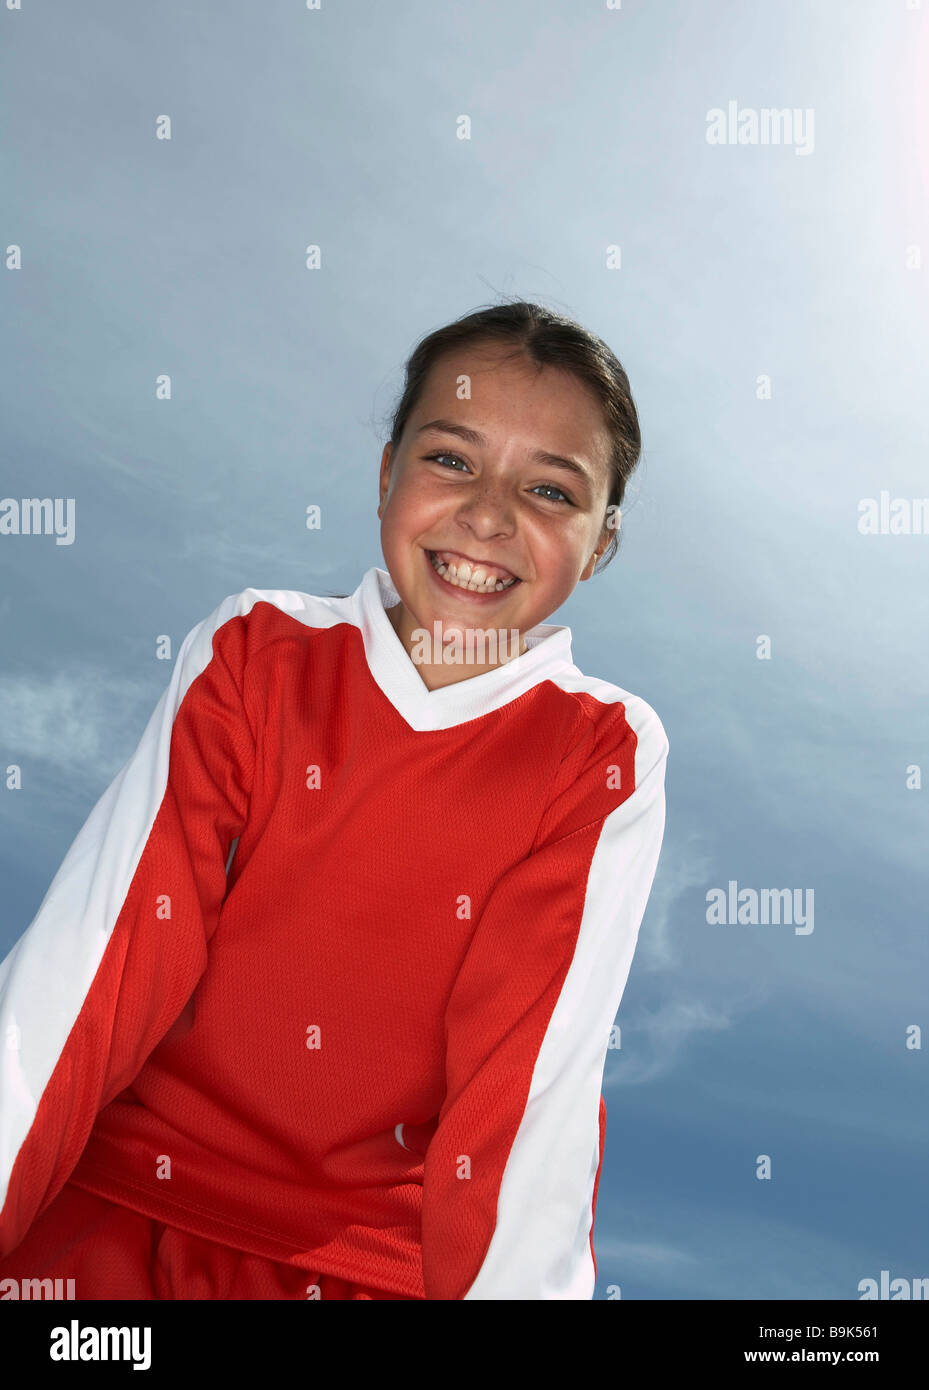 Low viewpoint of young female footballer Stock Photo